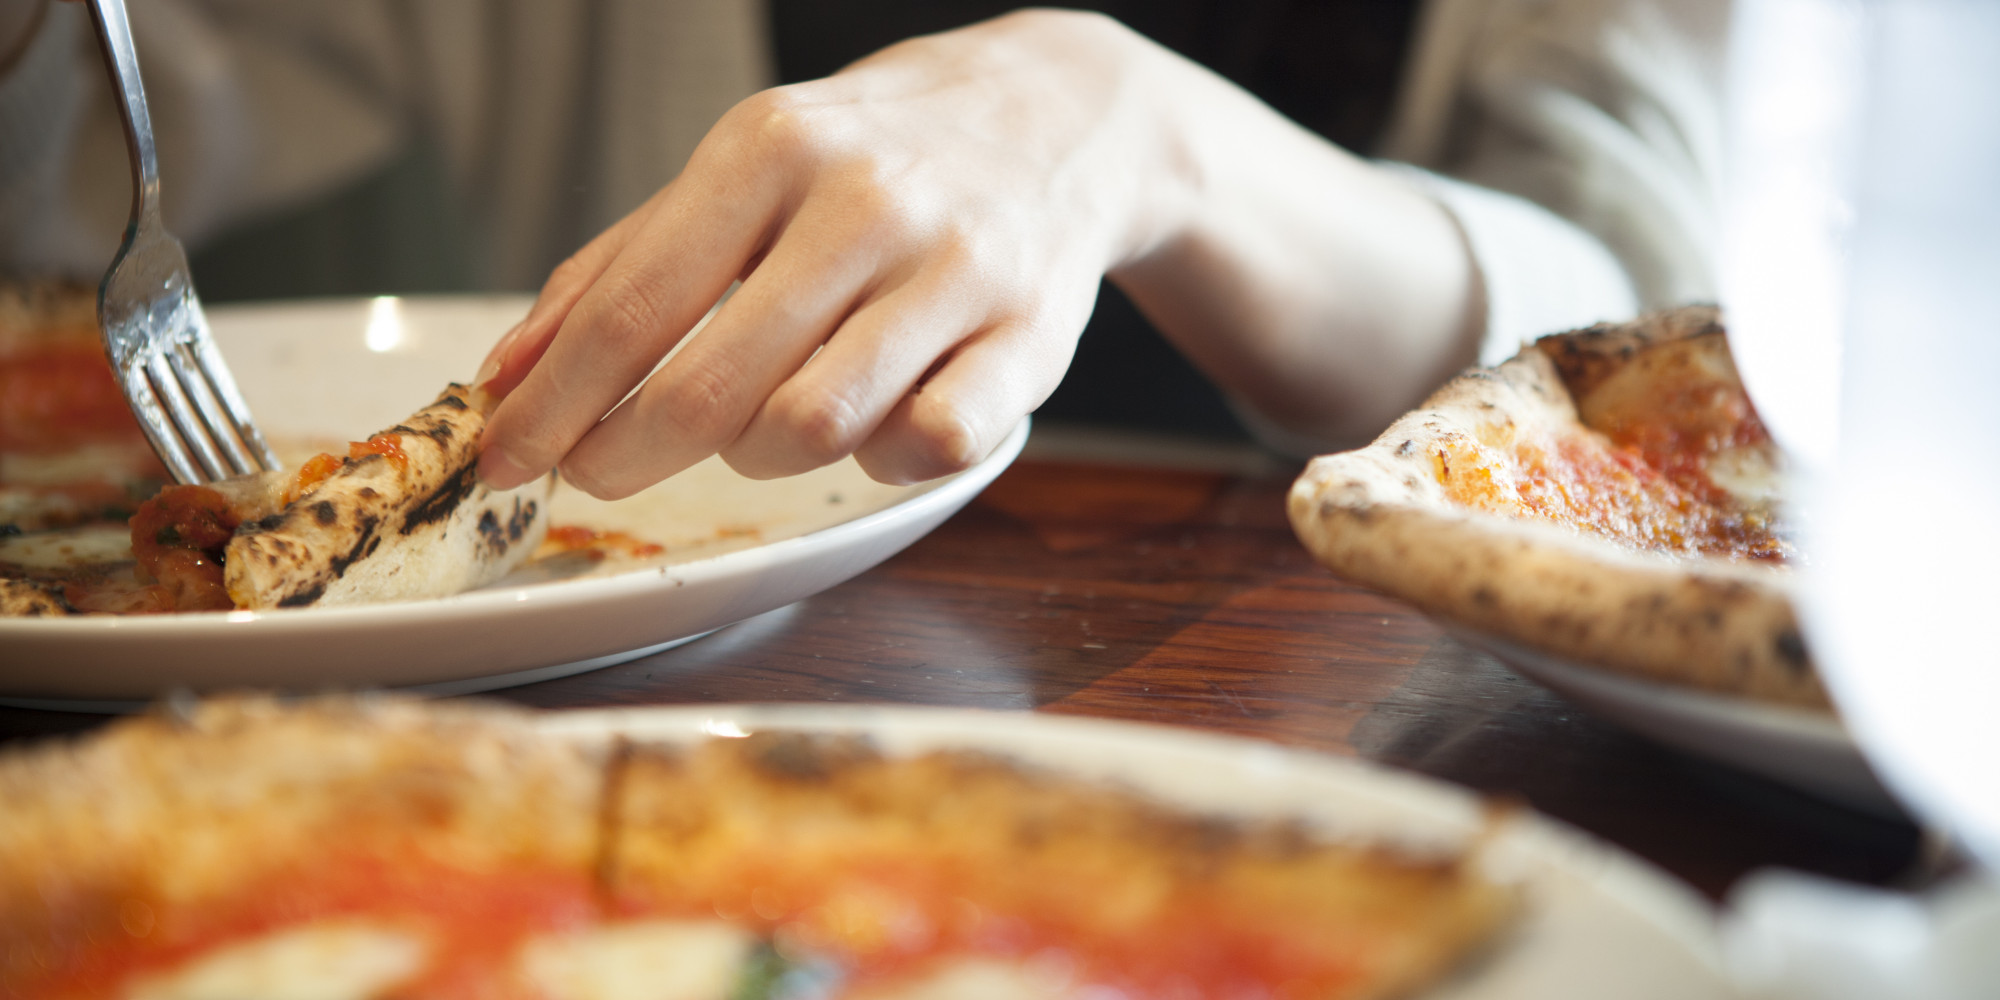 The 15 Most Allergy-Friendly Restaurant Chains | HuffPost